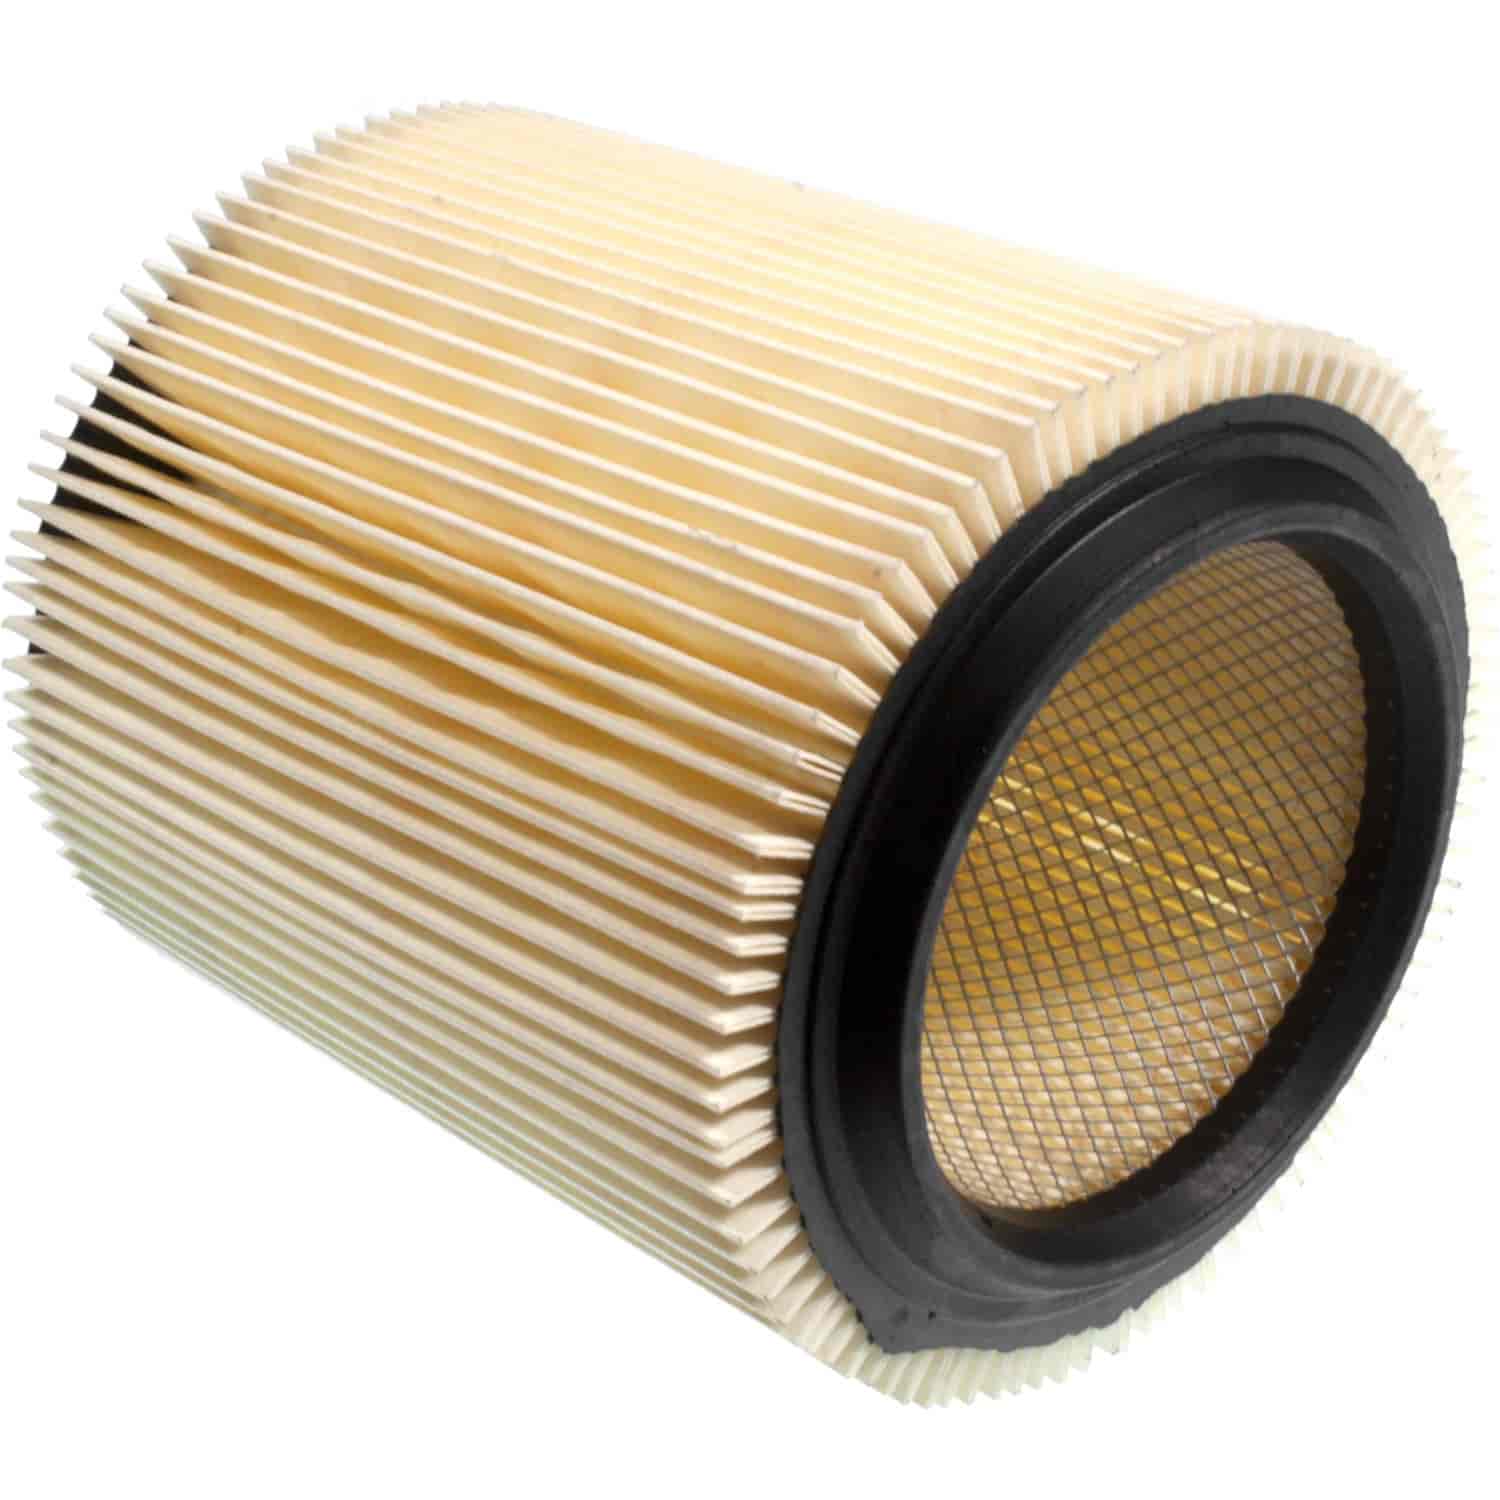 Mahle Air Filter Land Rover Defender 3.9L 1993-1996